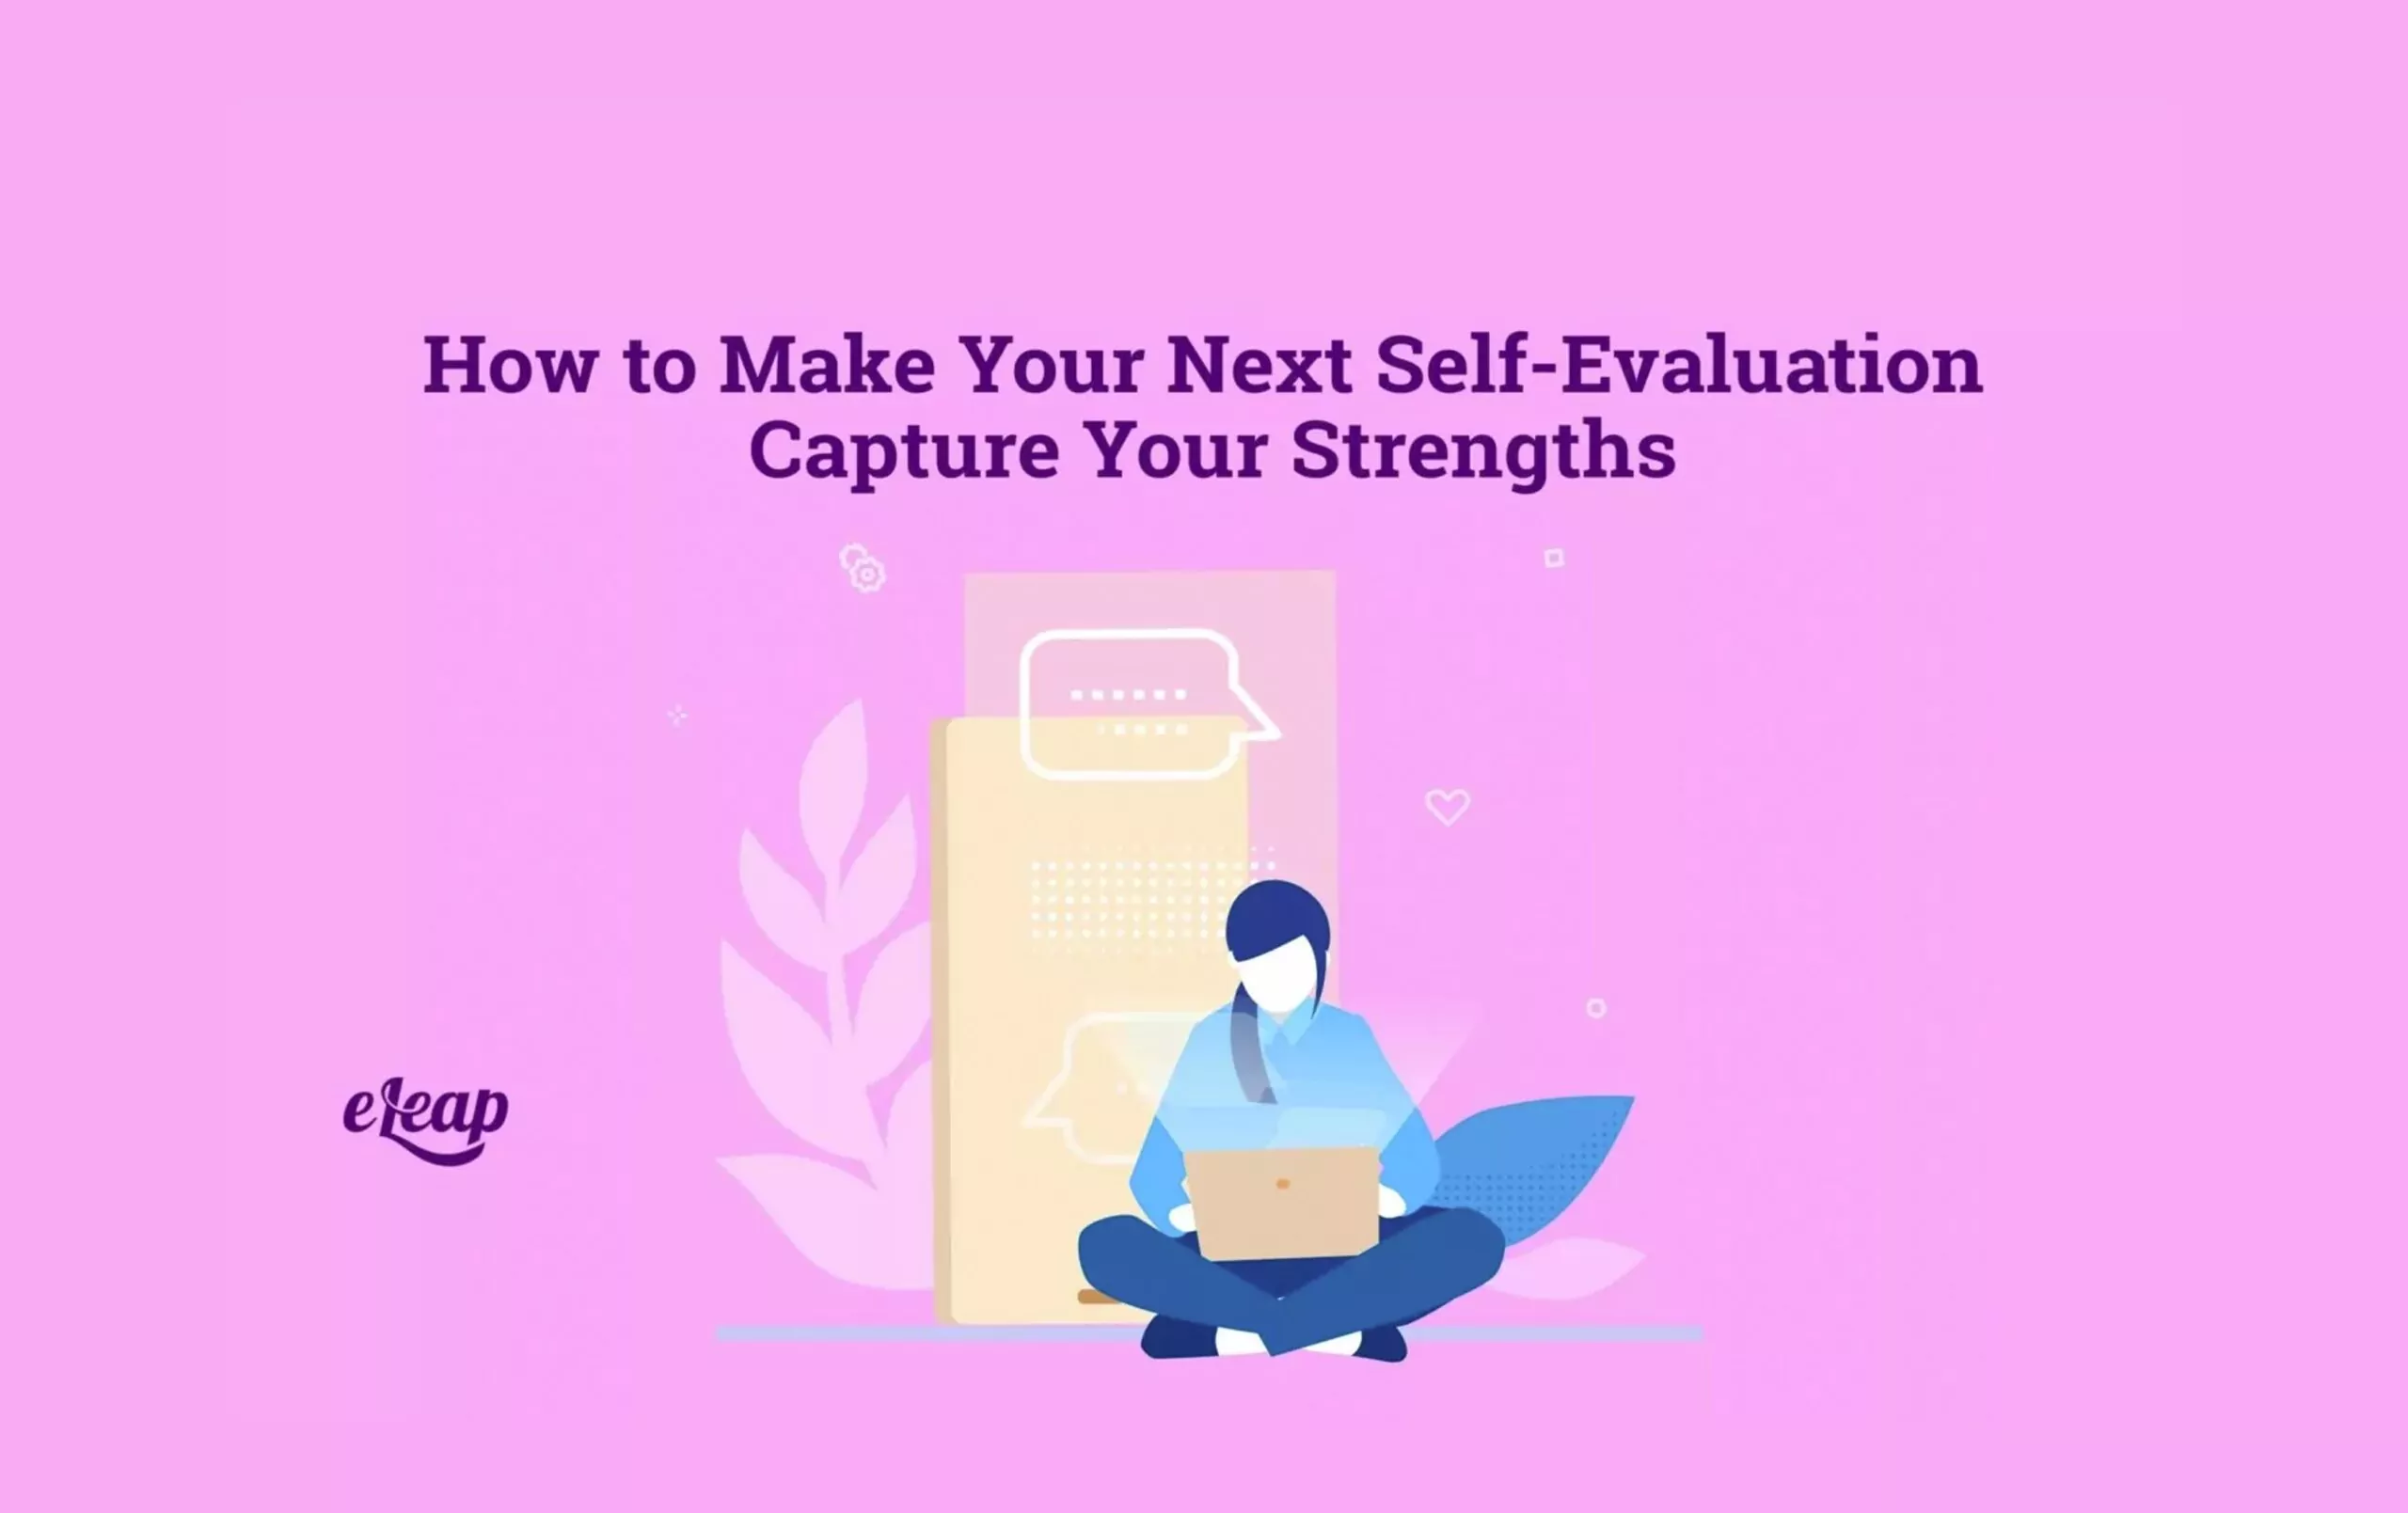 How to Make Your Next Self-Evaluation Capture Your Strengths